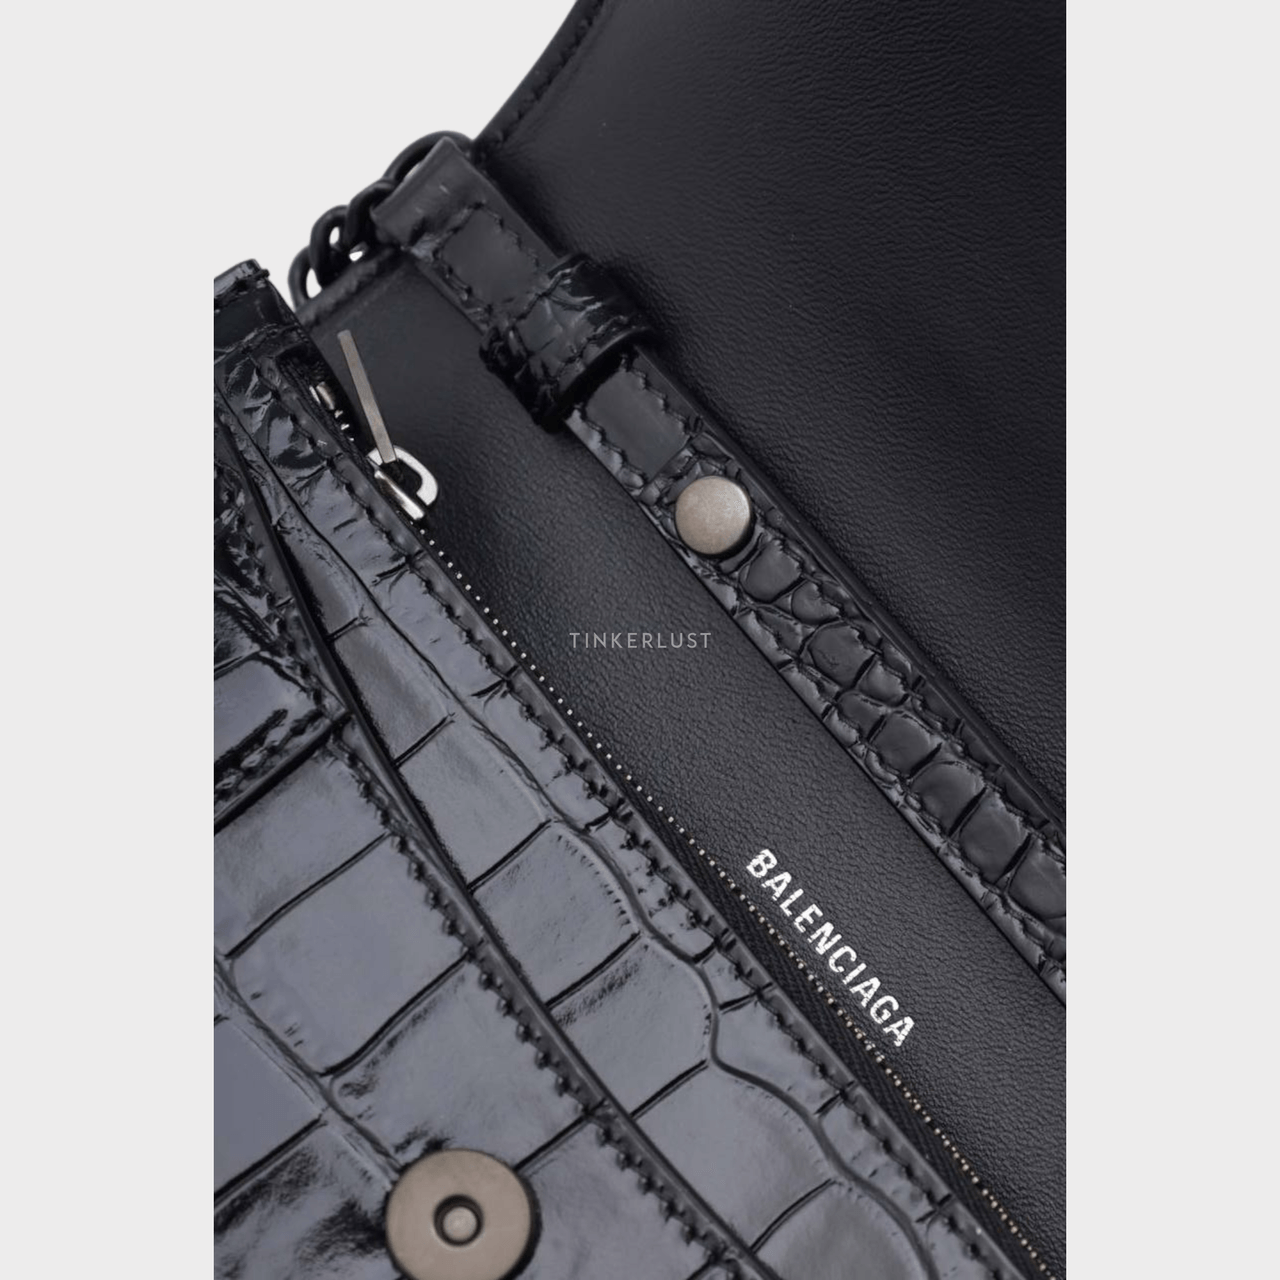 Balenciaga Hourglass Wallet on Chain in Black Shiny Croco Embossed BHW Sling Bag